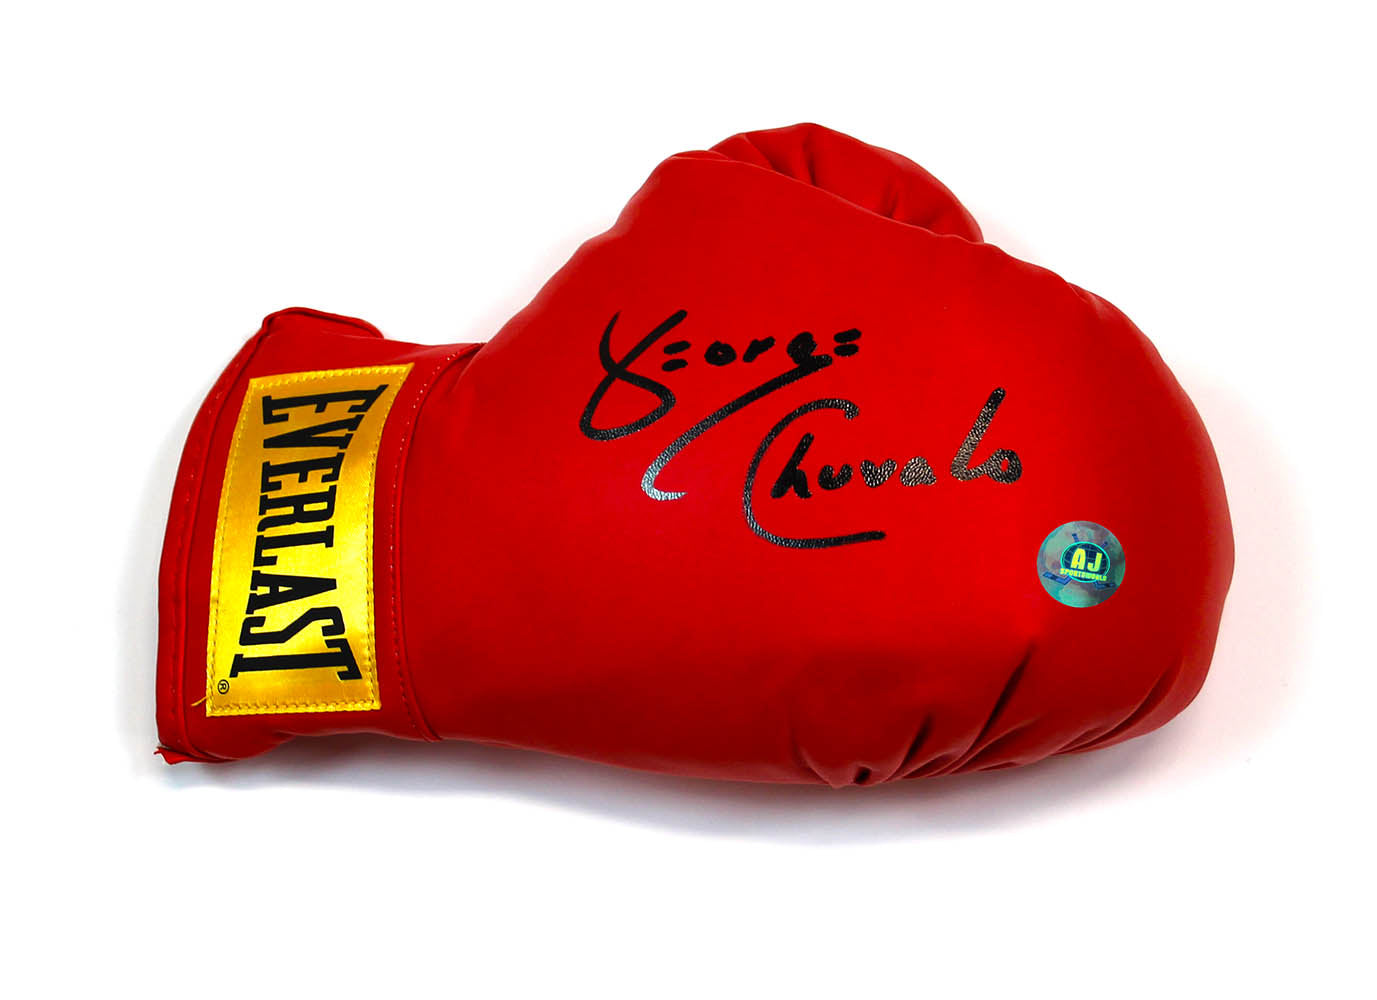 George Chuvalo Autographed Red Everlast Boxing Glove